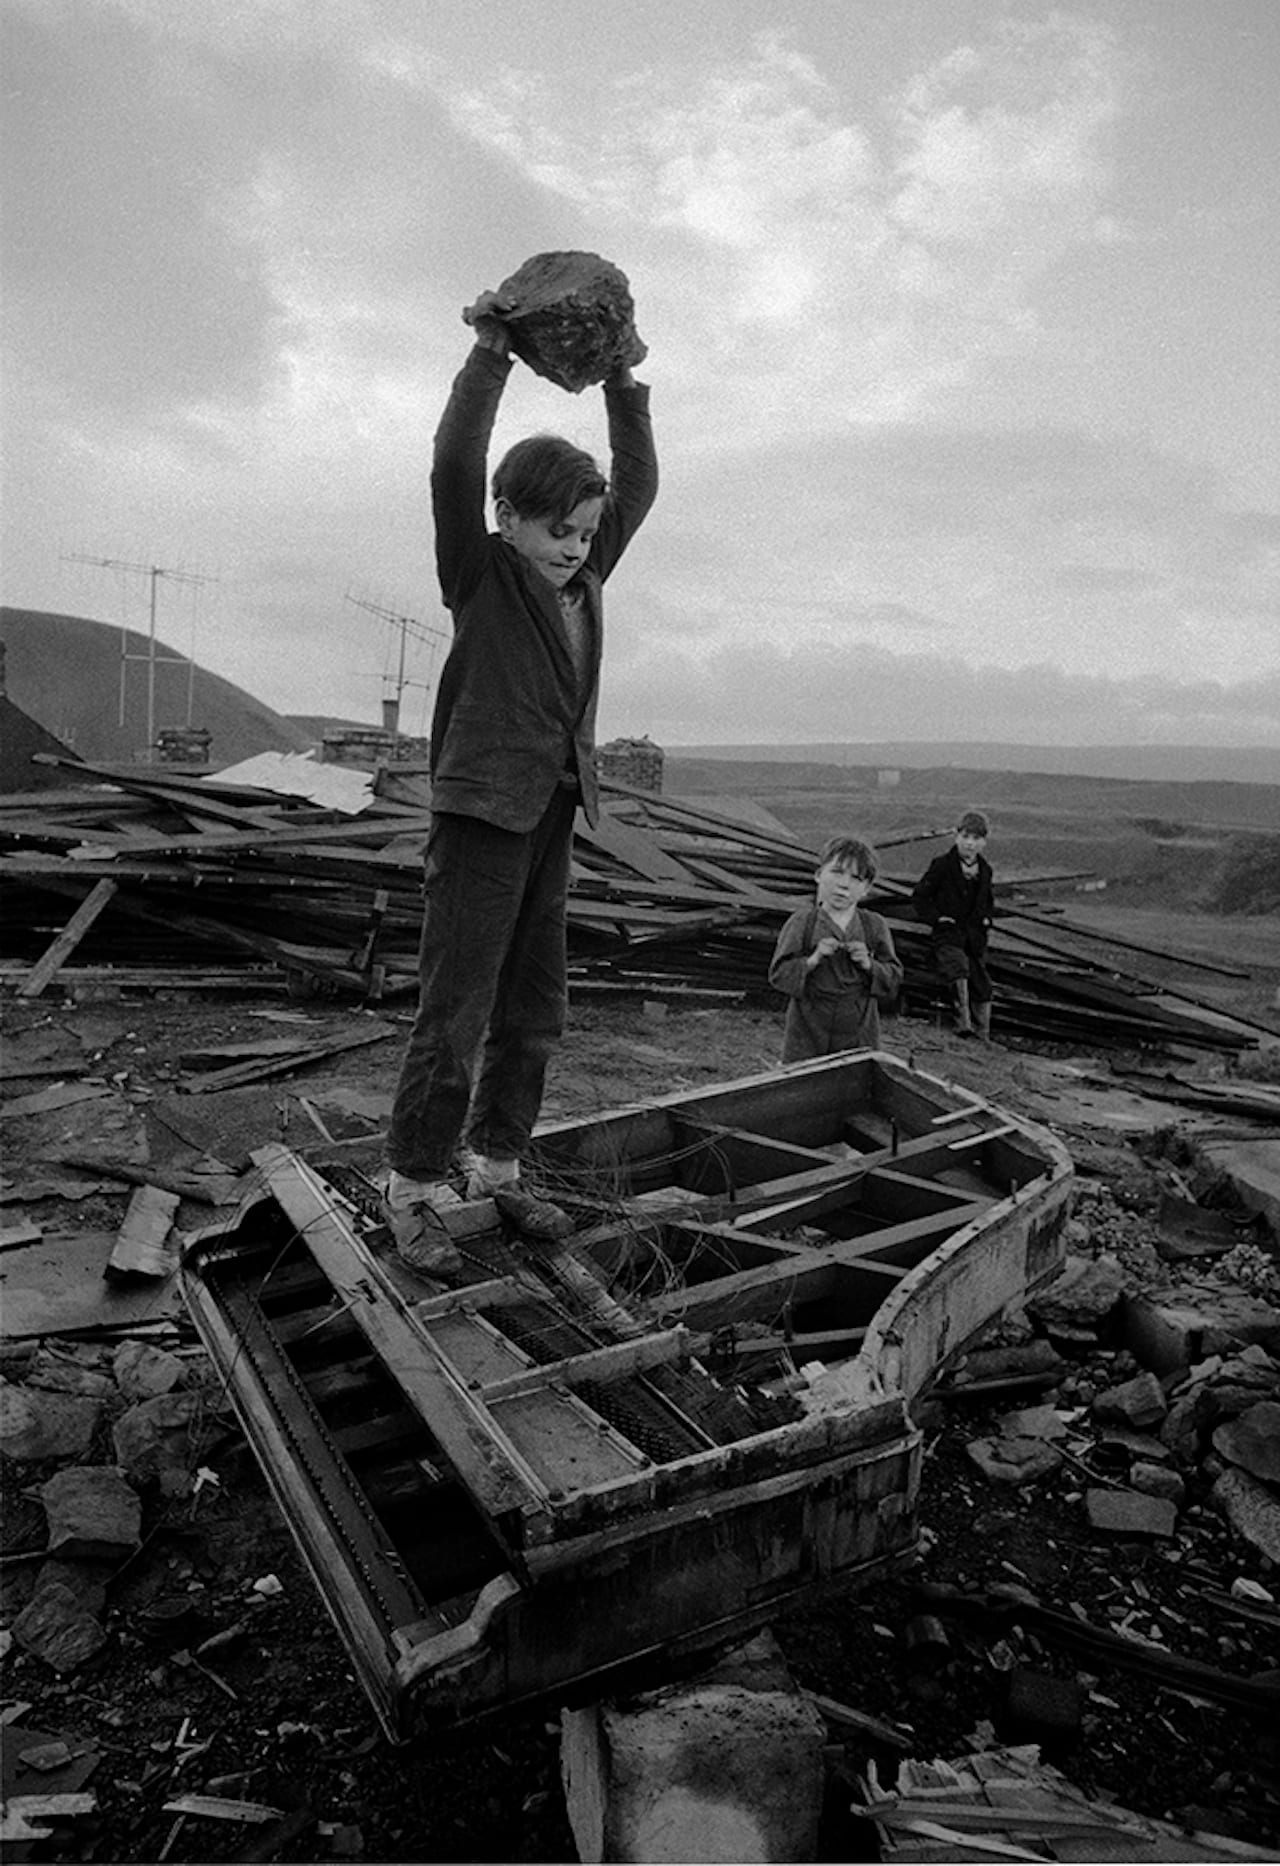 Boy Destroying Piano by Phillip Jones Griffiths